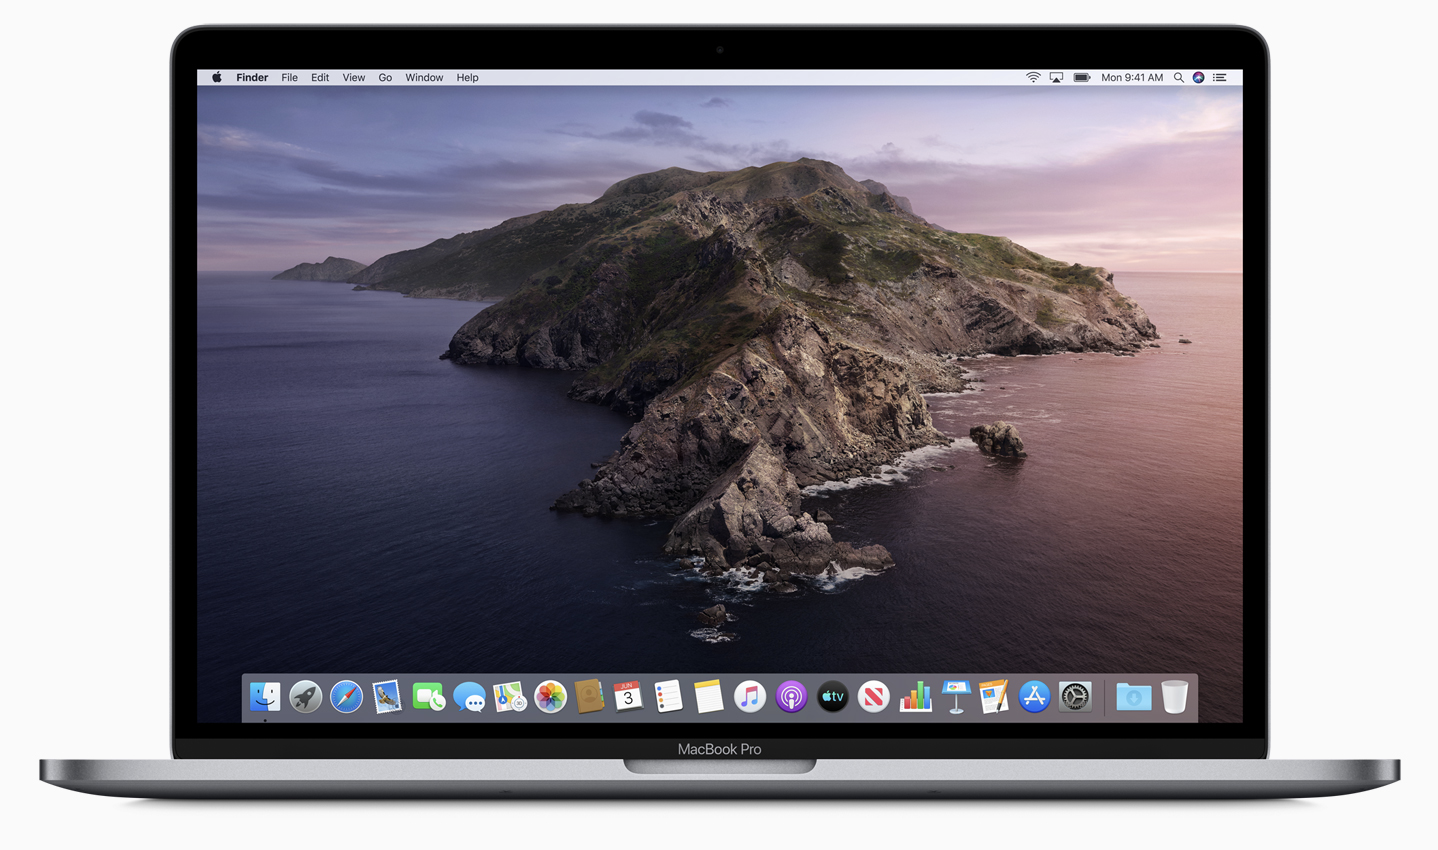 Apple posts first public beta of macOS Catalina 10.15.4